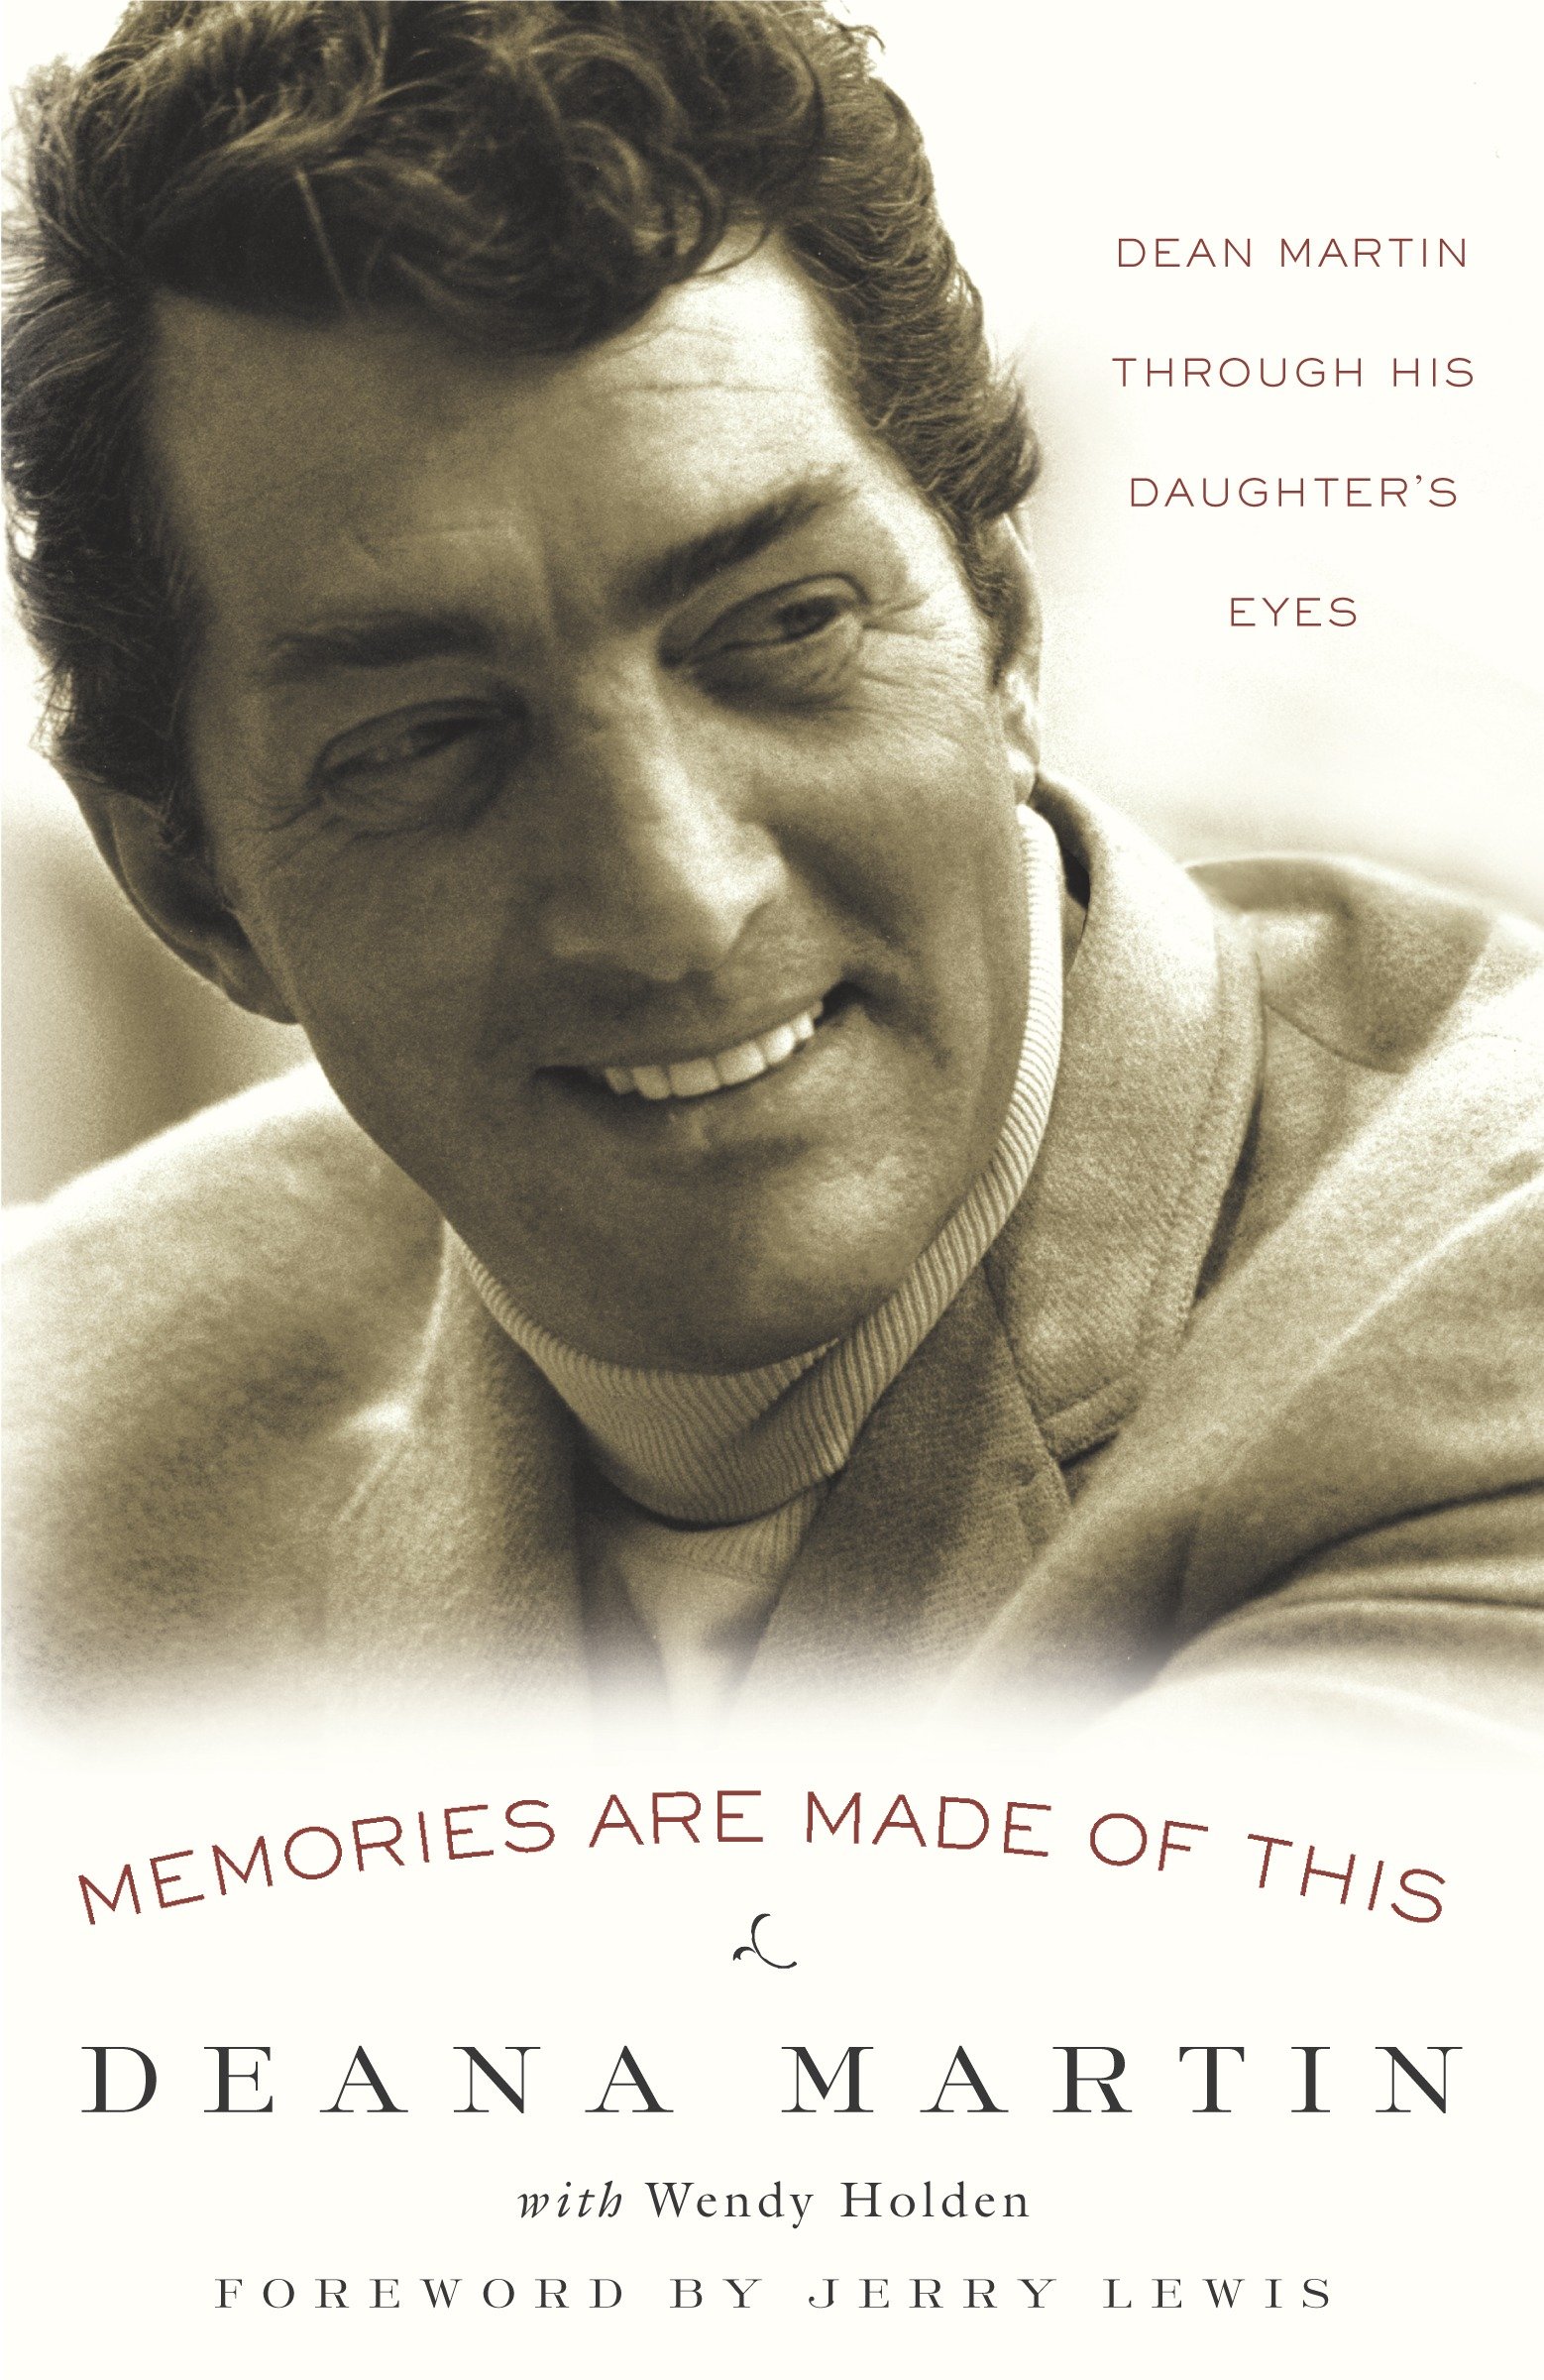 Memories are made of this : Dean Martin through his daughter's eyes cover image